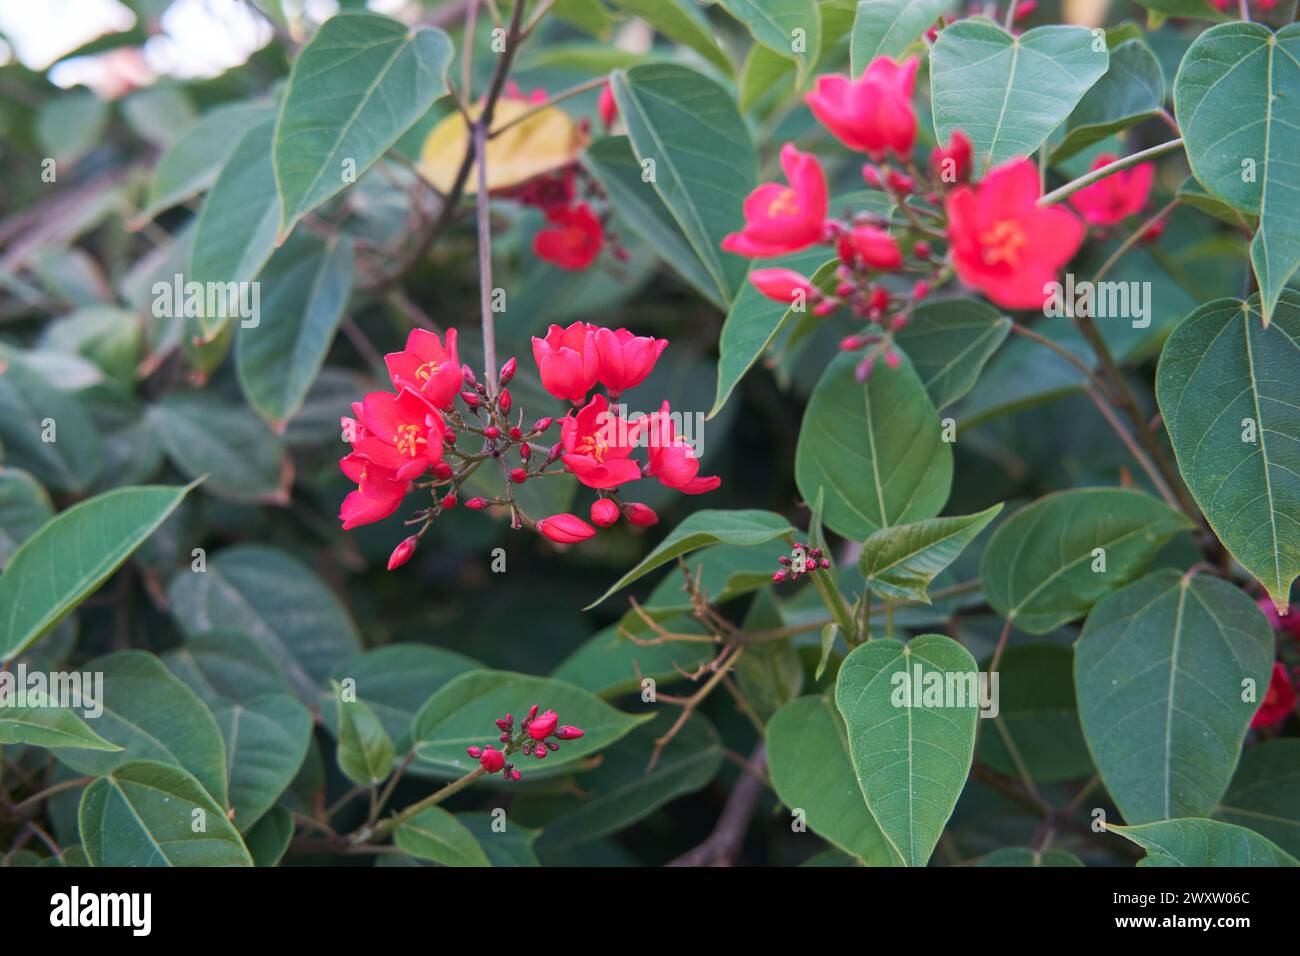 Vibrant Jatropha integerrima flowers with bright red petals among green leaves Stock Photo